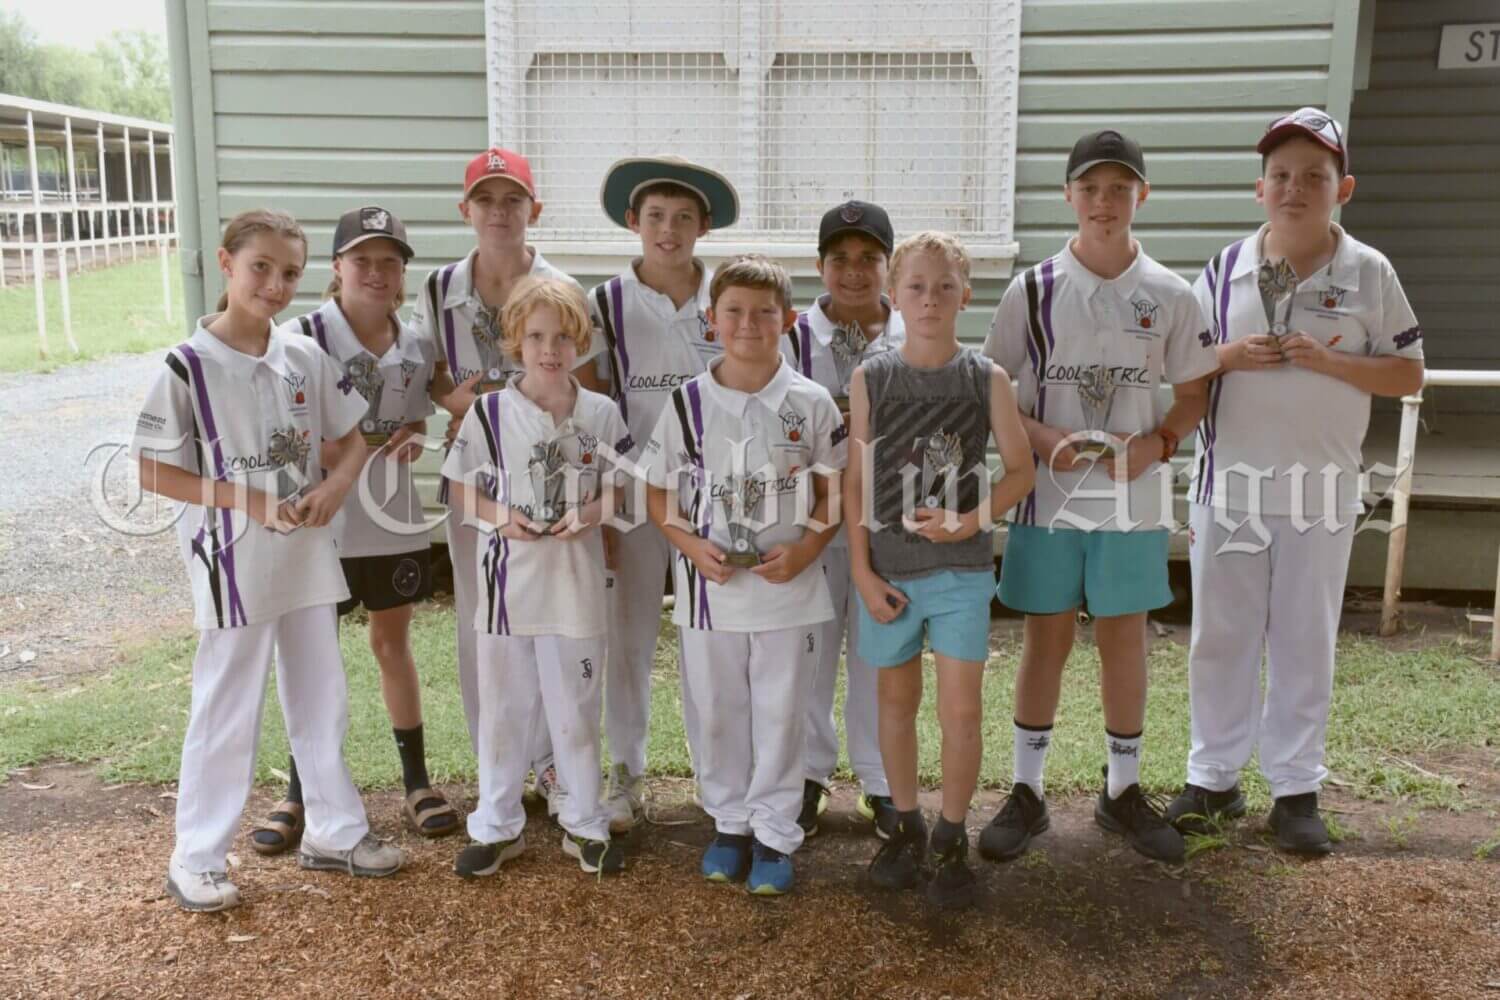 Kiacatoo won the 2023 Under 13s Condobolin Cricket Association Grand Final in a close contest against Colts. The Kiacatoo team was presented with their trophies at the Condobolin Junior Cricket Association’s Presentation Day on Saturday, 25 March. Image Credit: Melissa Blewitt.